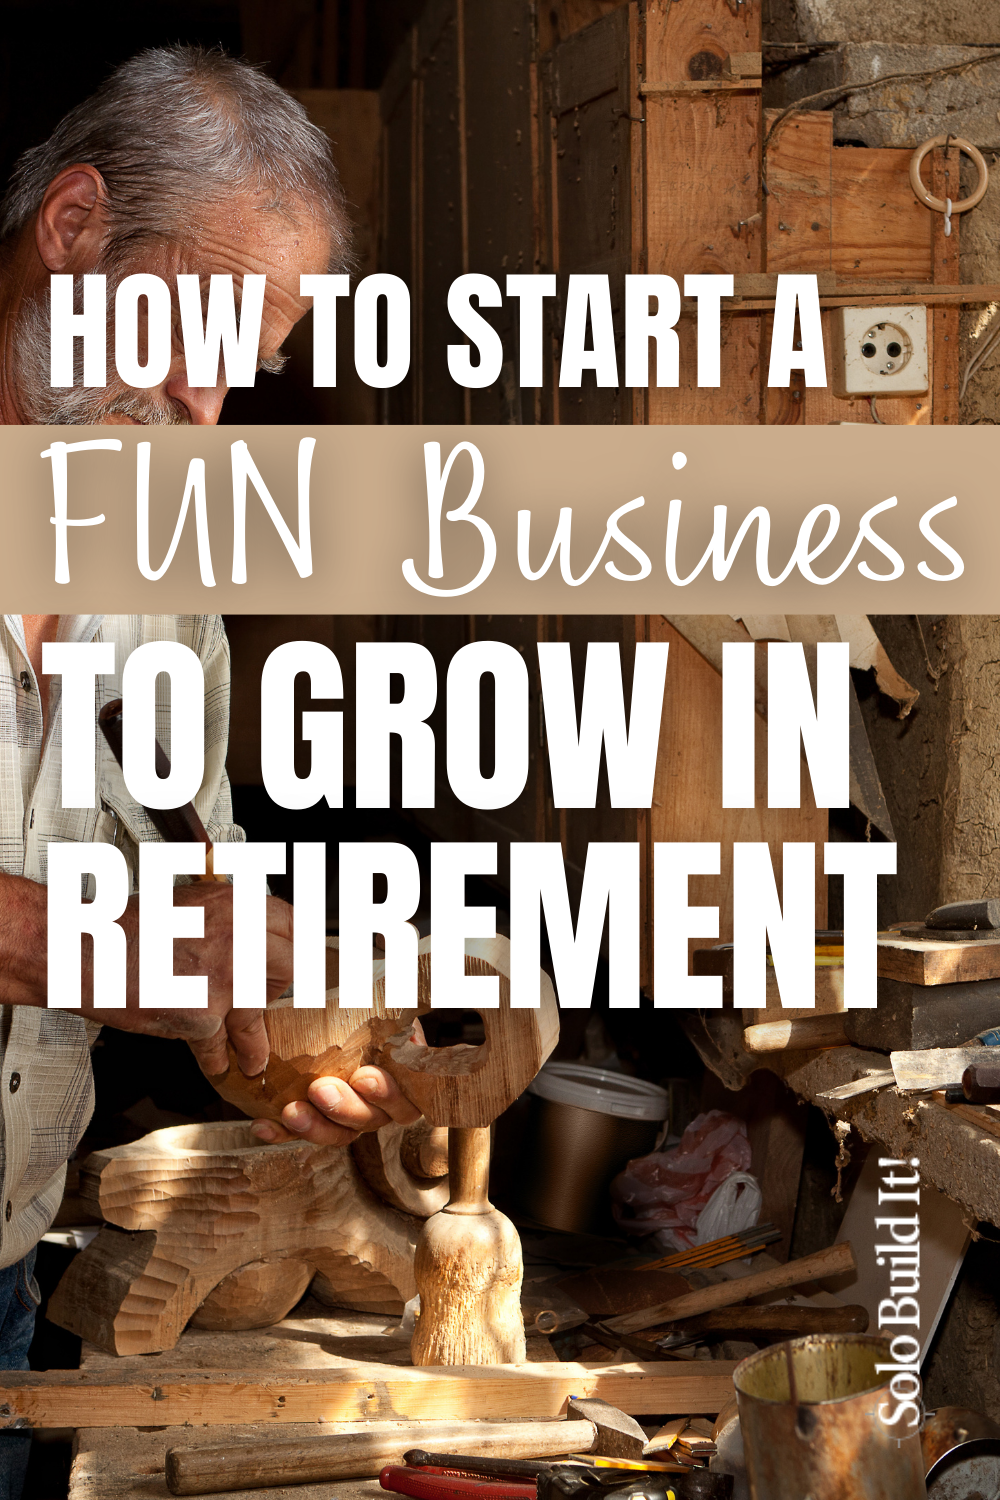 How This Solopreneur Carved Out a Fun Business for Retirement